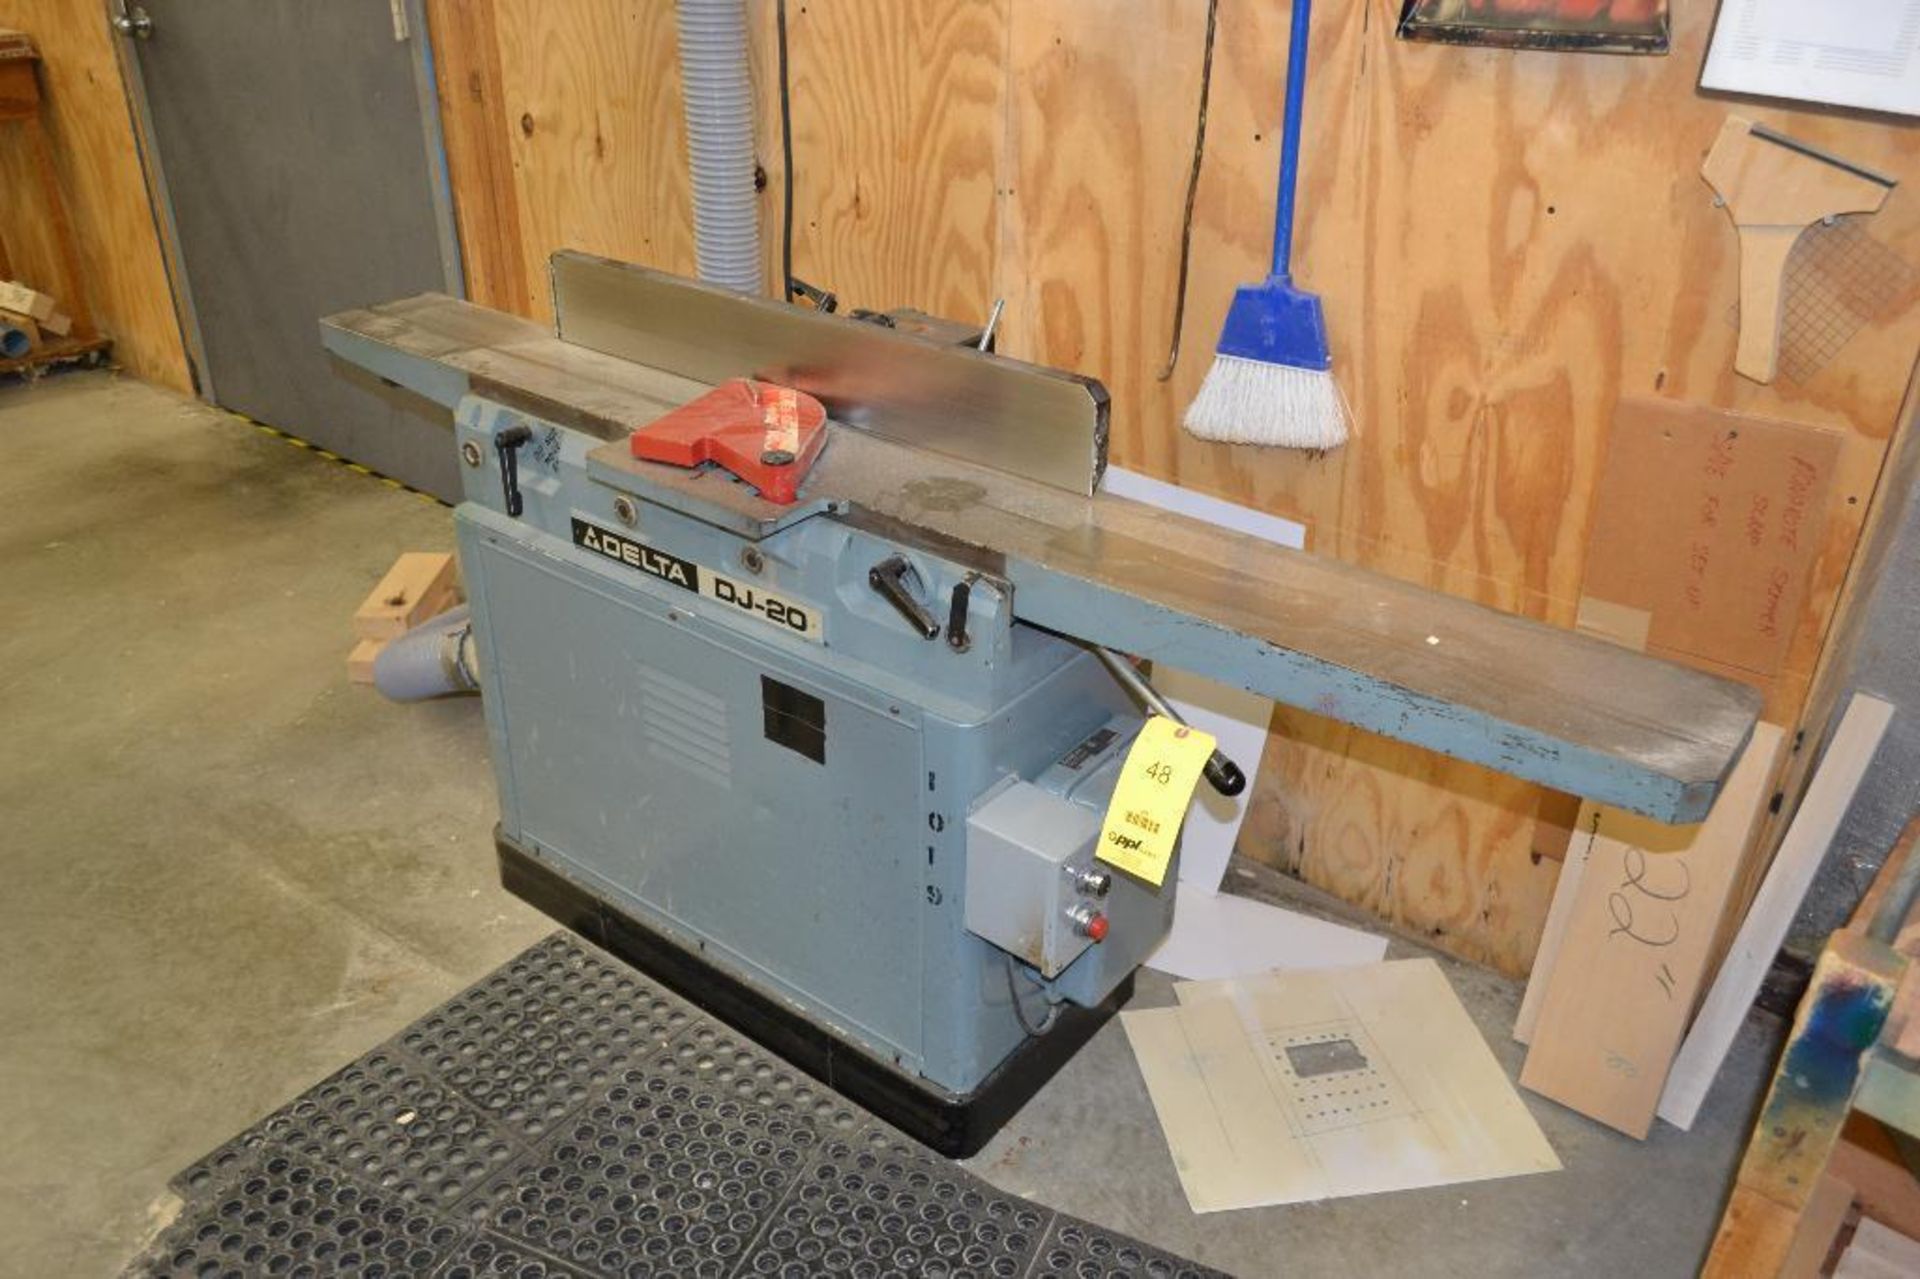 Delta 8 in. Round Head Jointer Model DJ-20, S/N 93D-11014, 8 in. x 77 in. Work Table